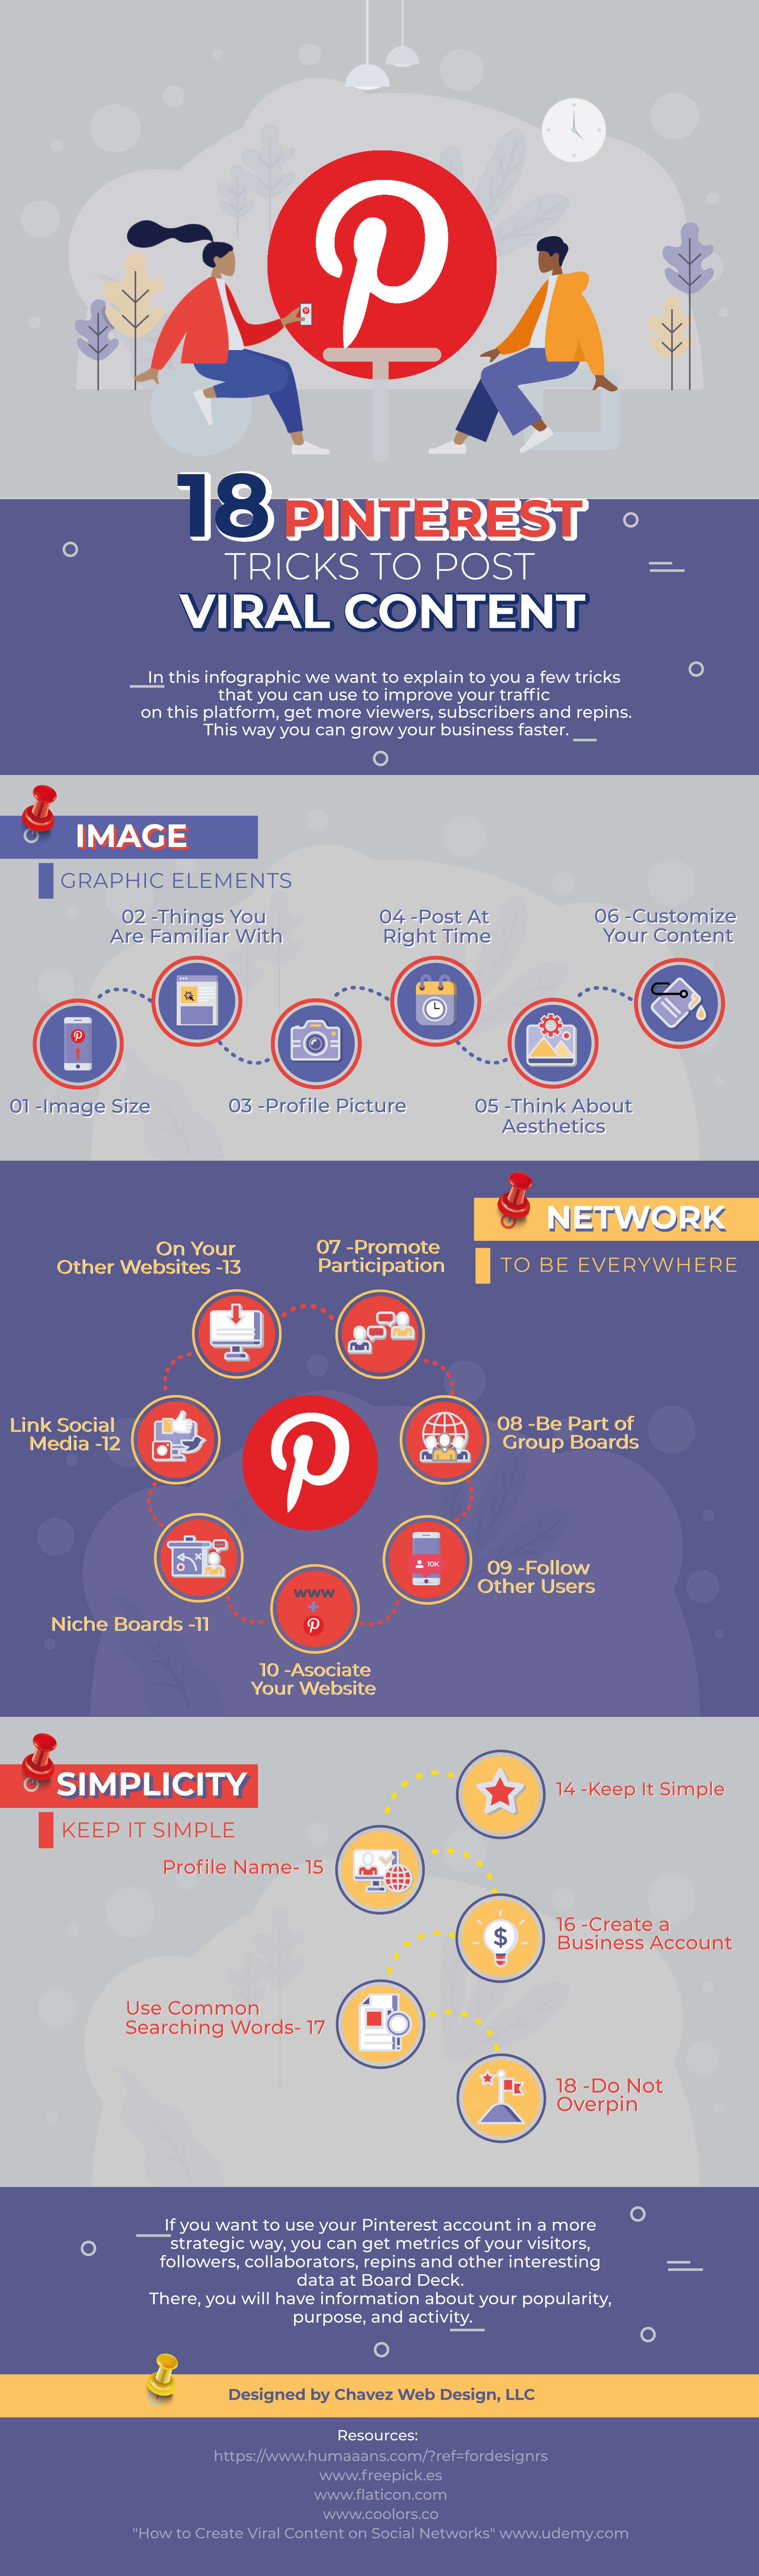 How to create viral content on Pinterest